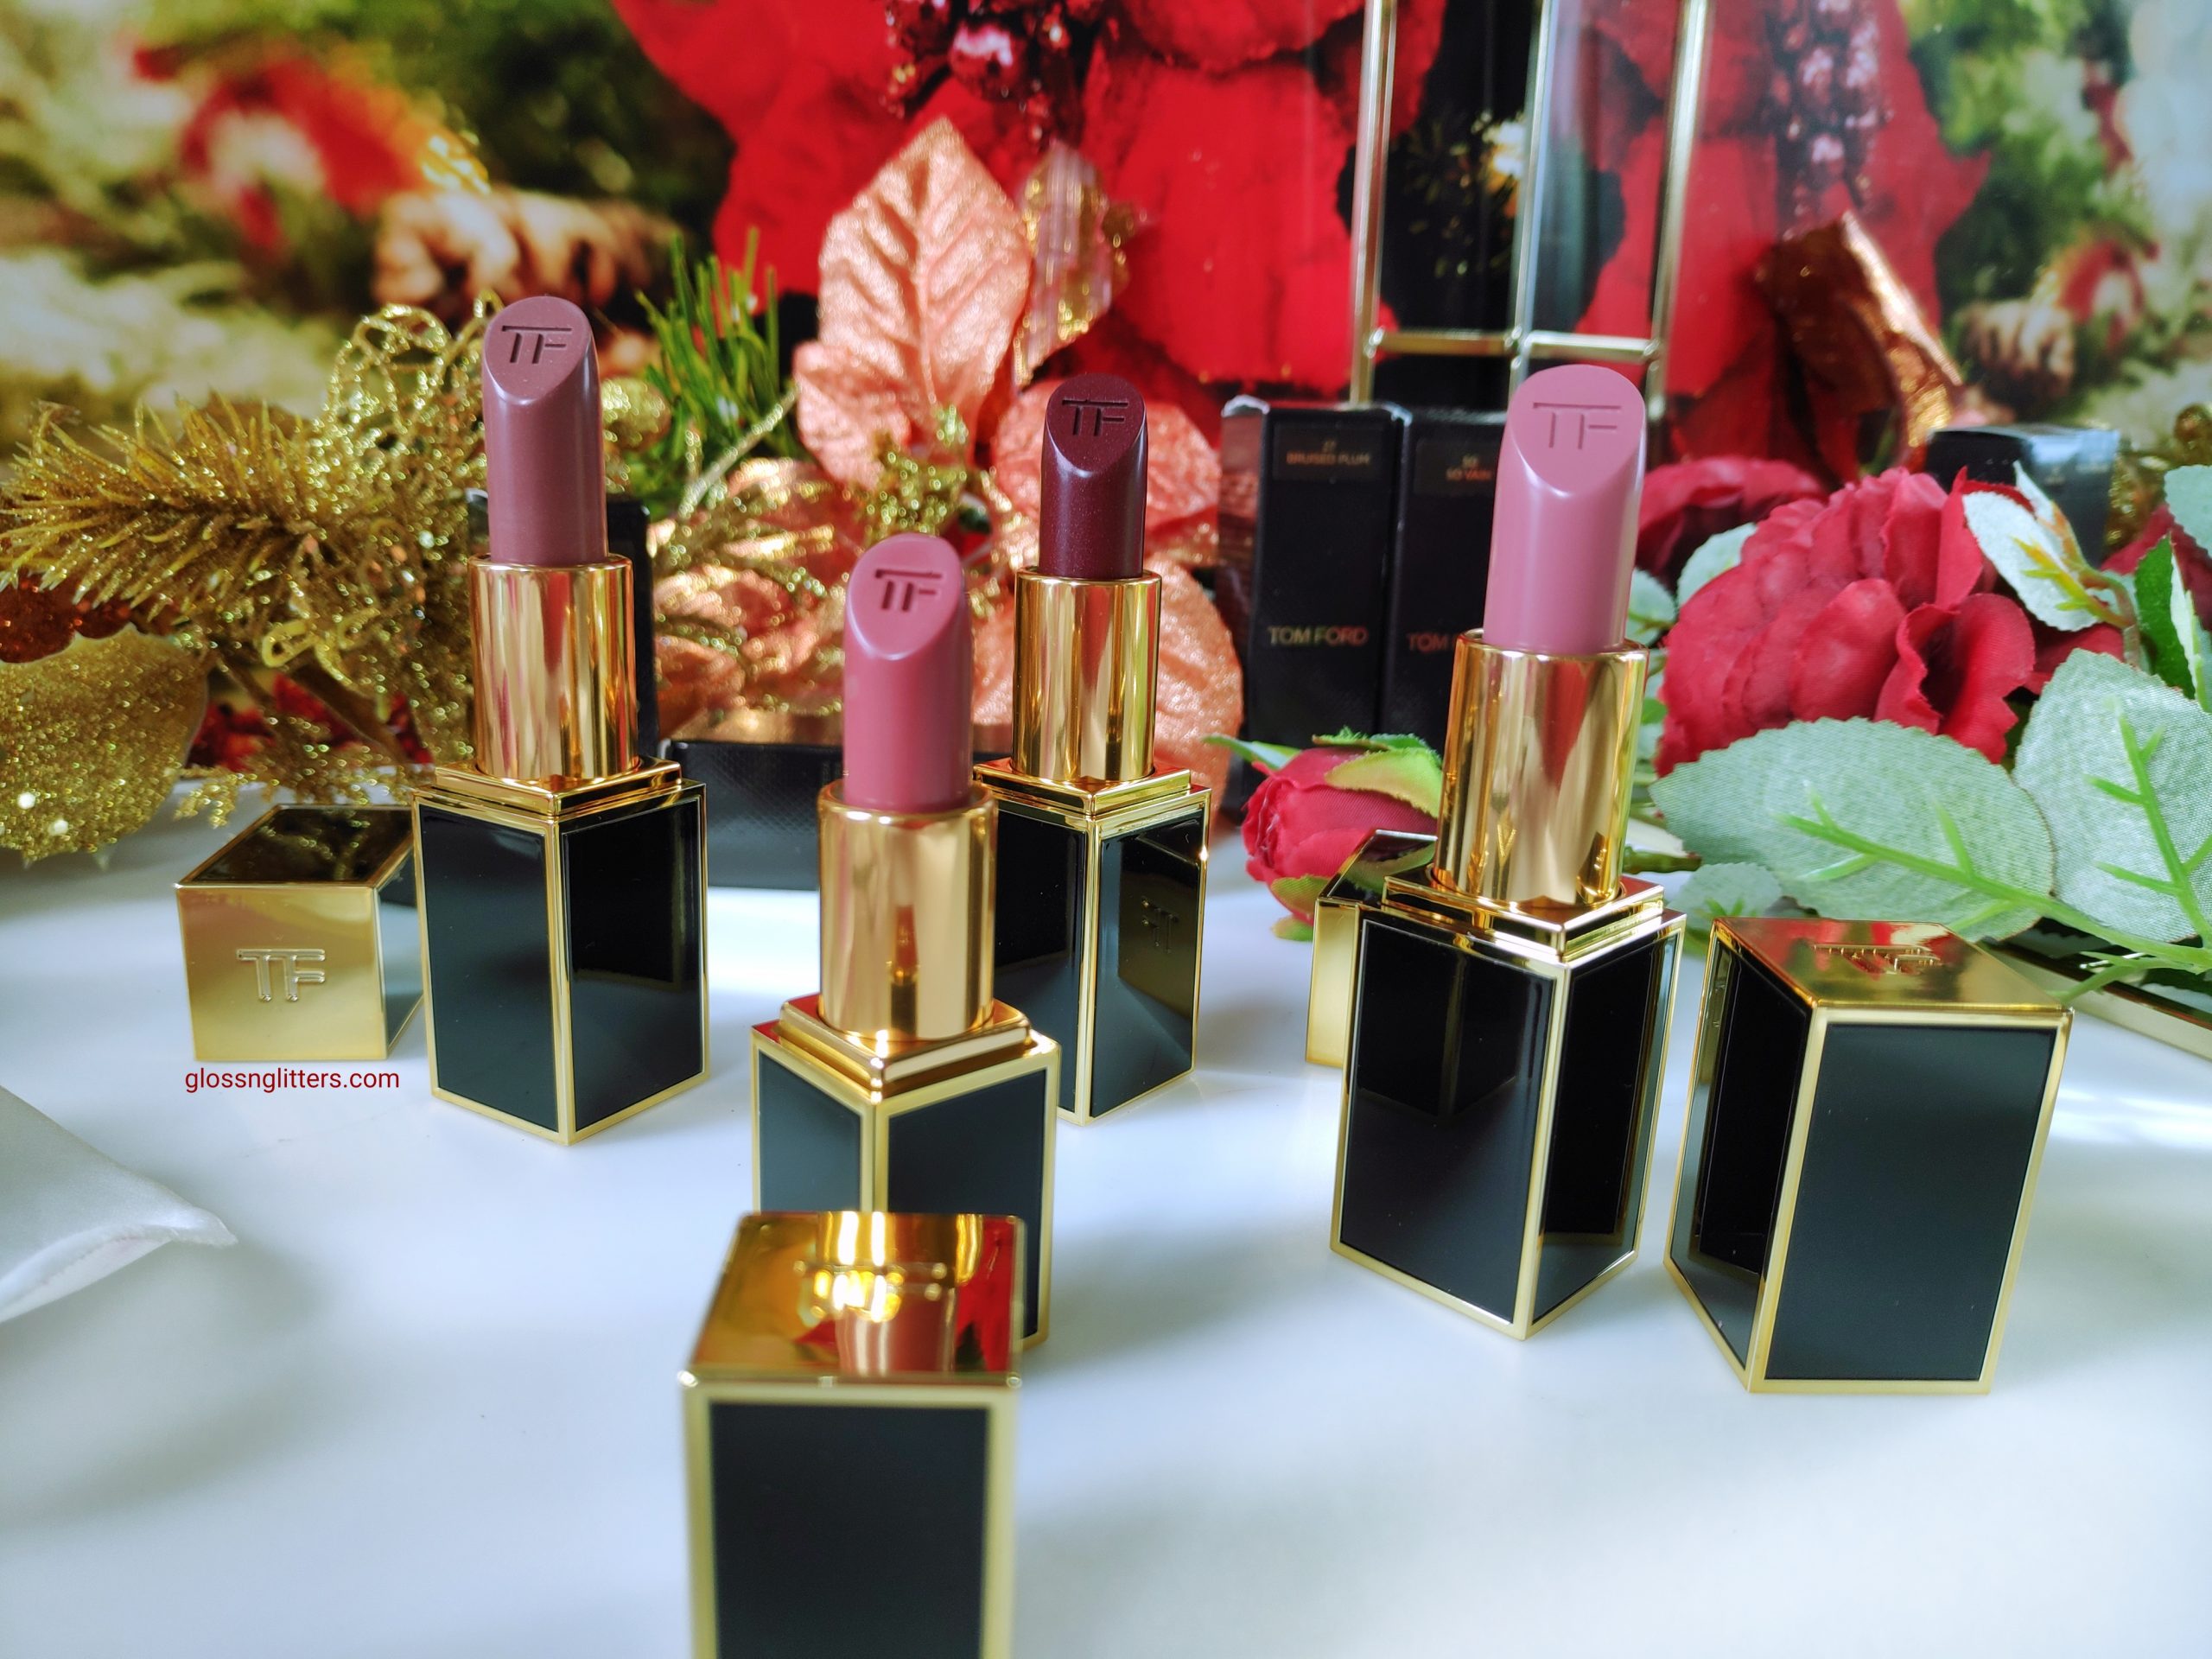 Tom Ford Lipstick Collection, Swatches & Mini Review